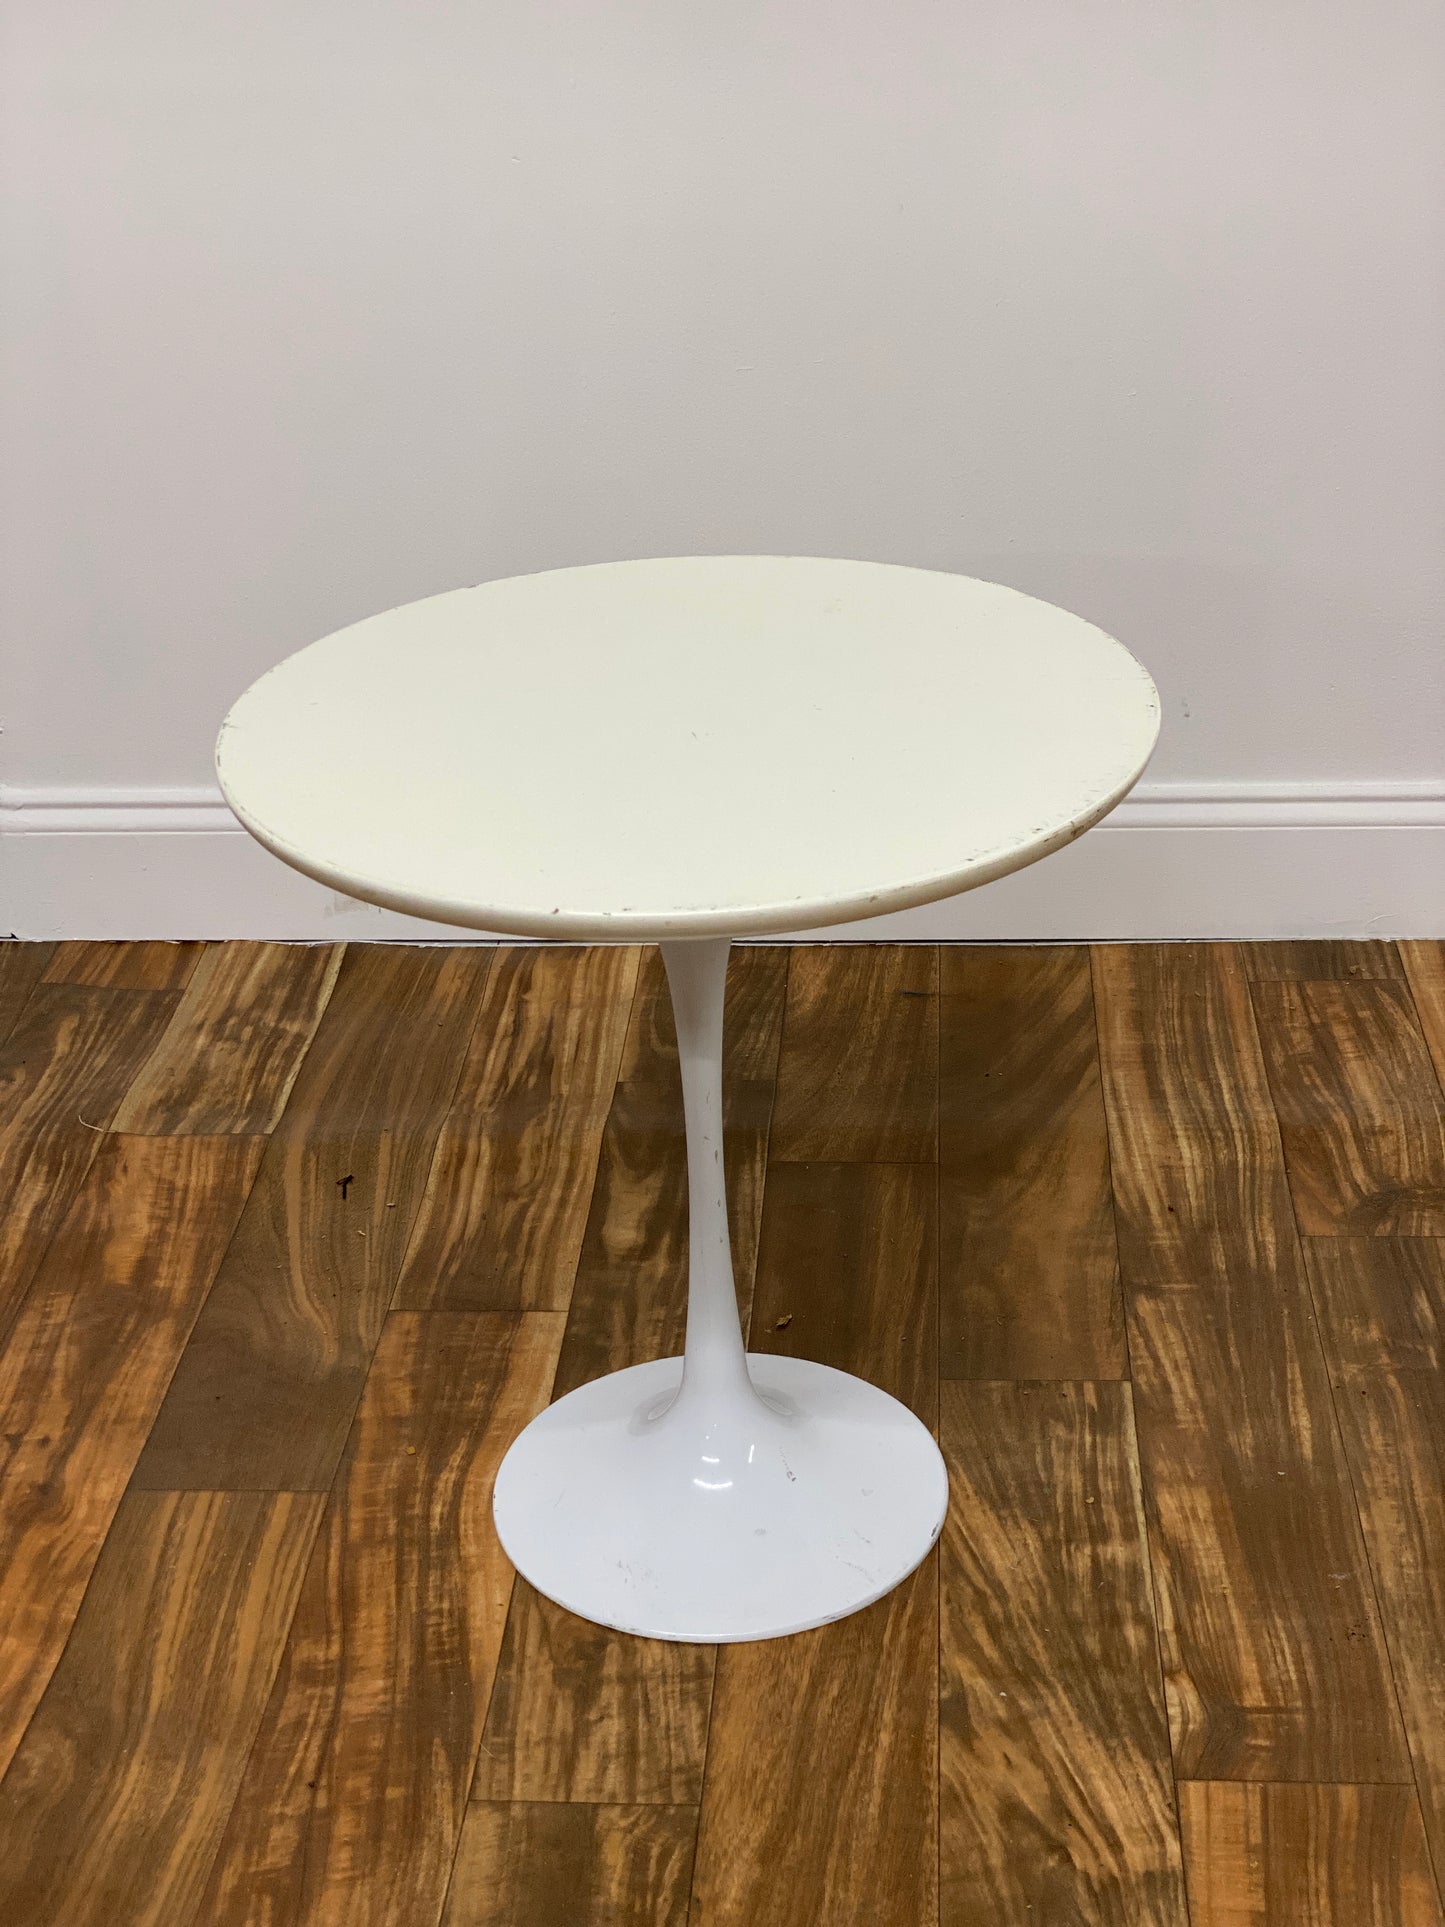 ROUND WHITE SIDE TABLE